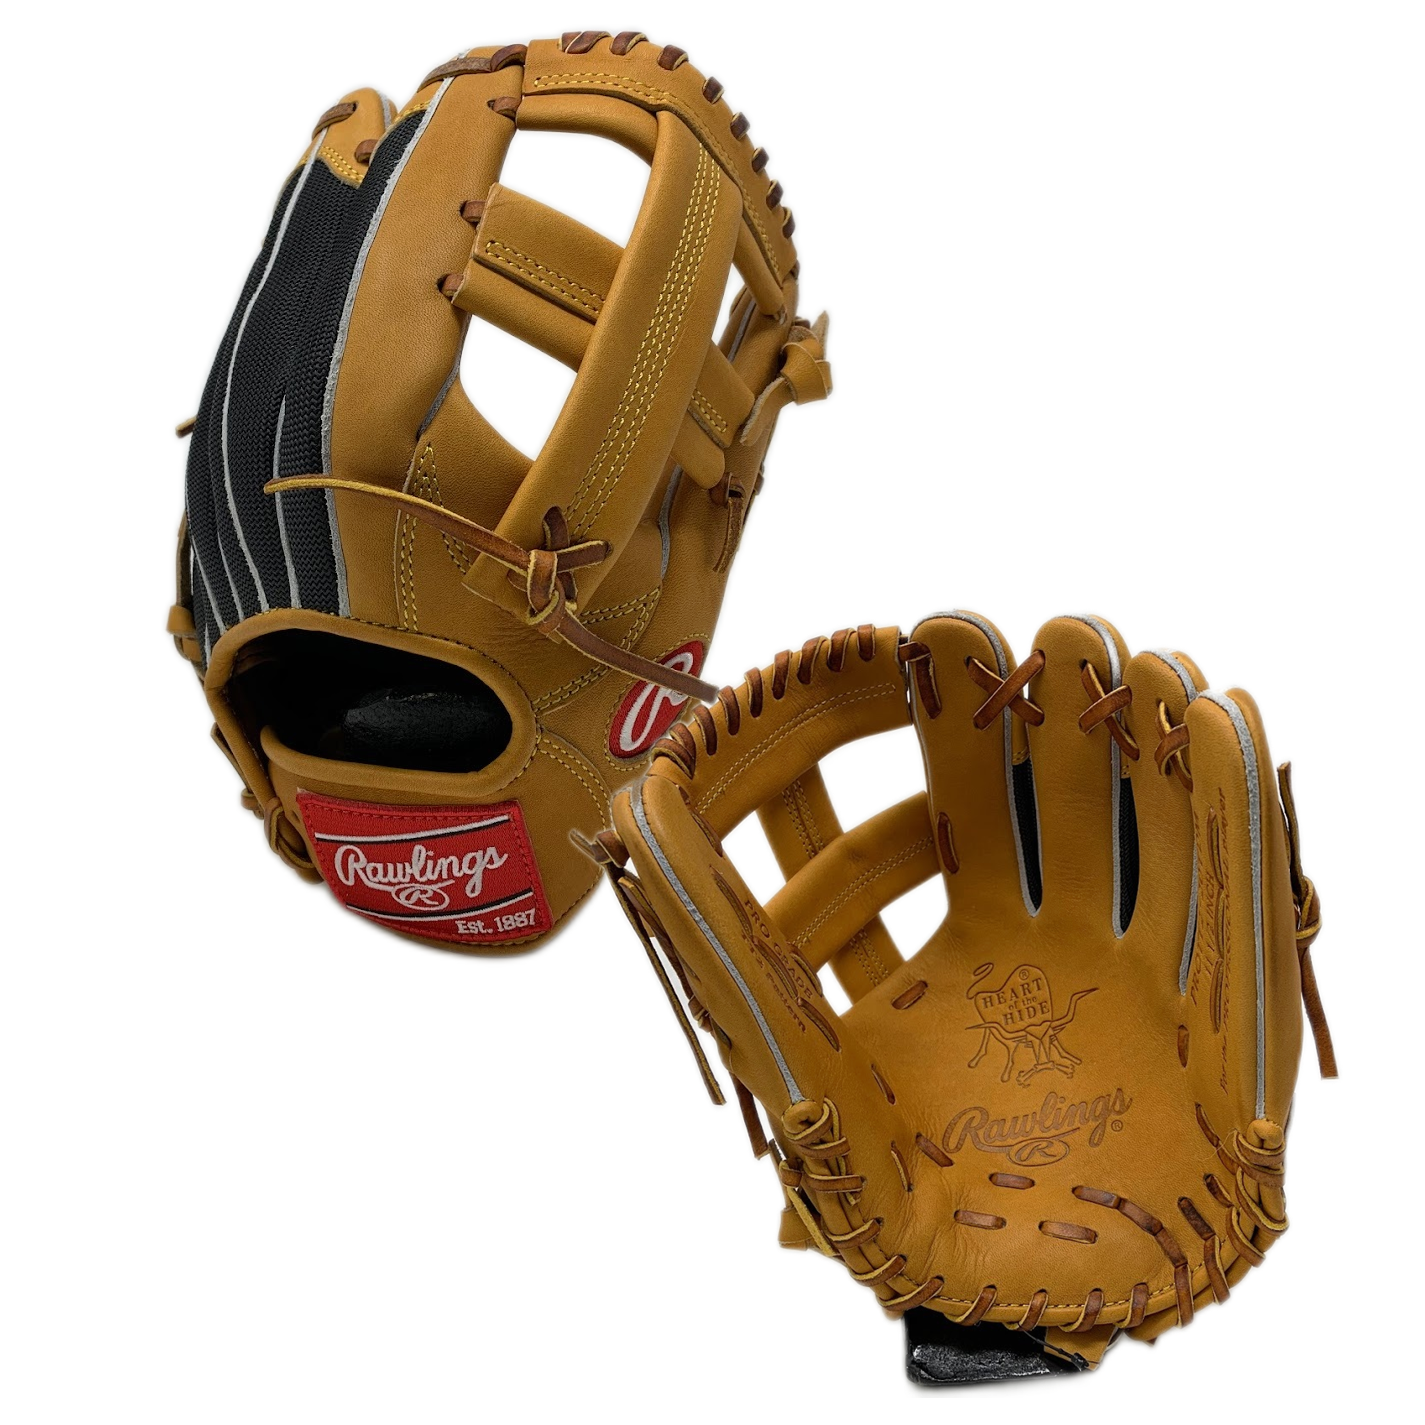 rawlings-heart-of-the-hide-11-5-inch-baseball-glove-tt2-pro-mesh-single-post-x-laced-web-right-hand-throw PROTT2-20TDM-RightHandThrow Rawlings  Constructed from Rawlings world-renowned Heart of the Hide steer leather and